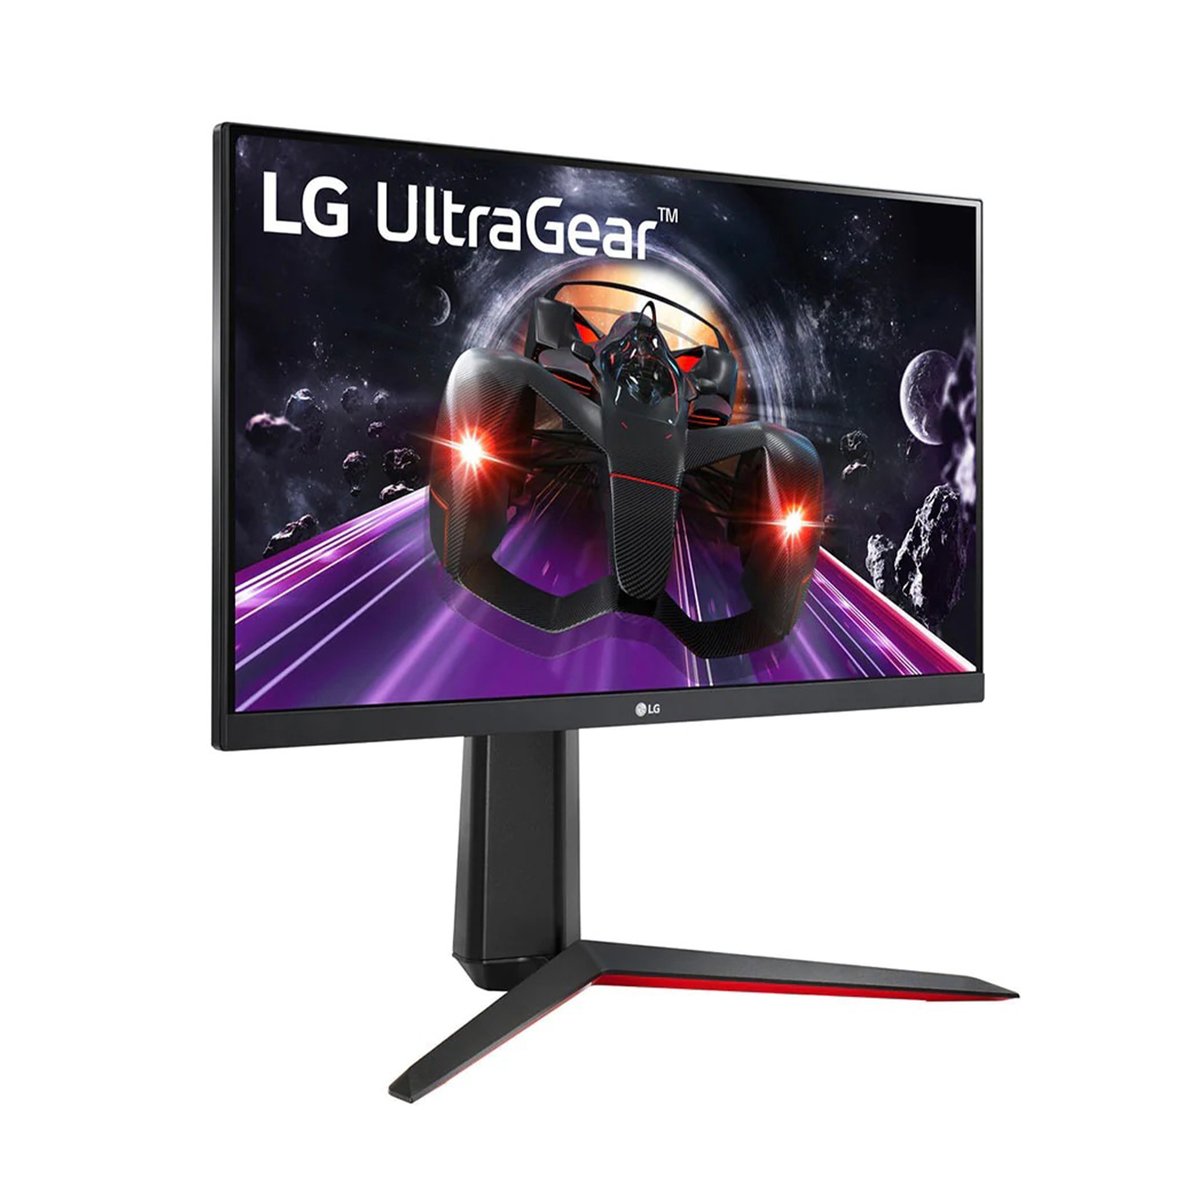 LG 24'' UltraGear FHD IPS 1ms 144Hz HDR Monitor with FreeSync 24GN650